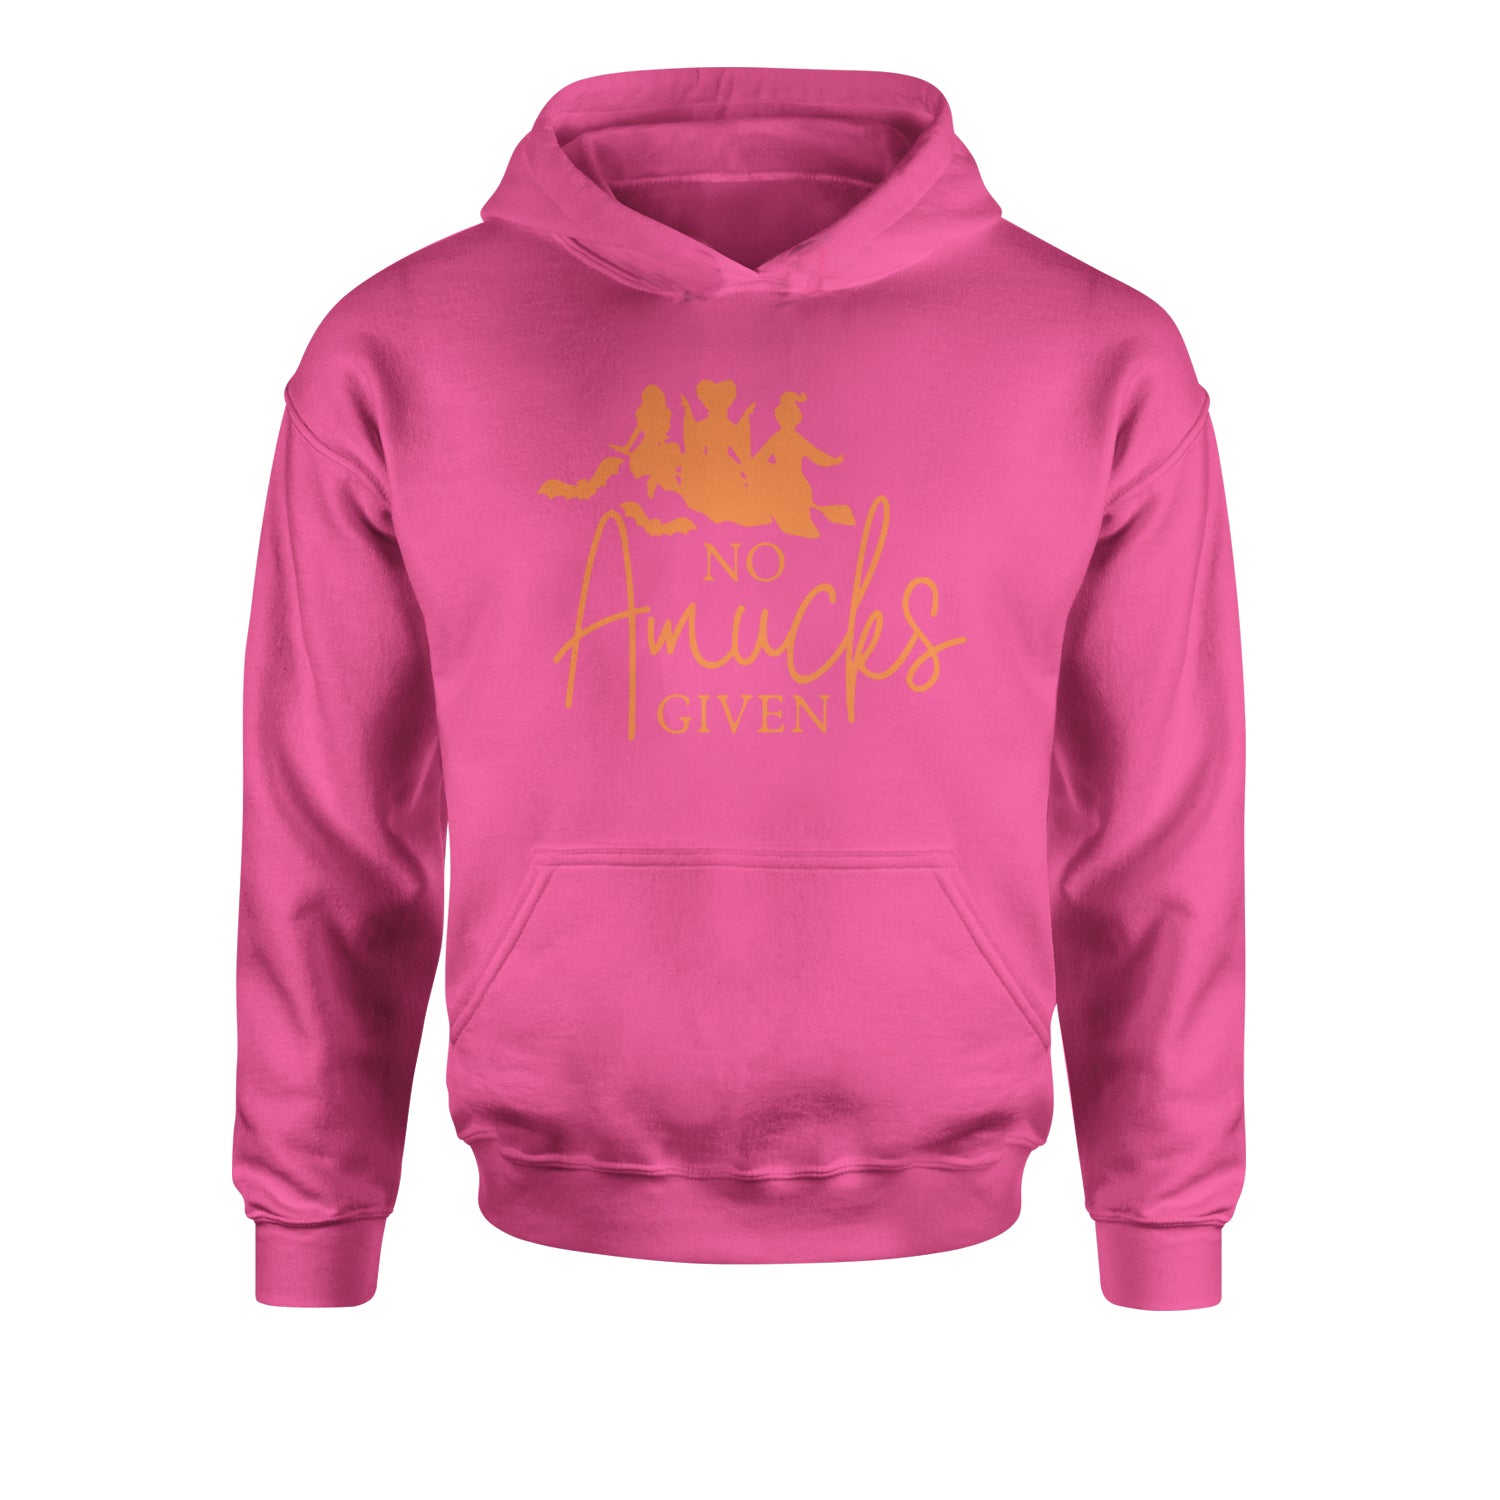 No Amucks Given Hocus Pocus Youth-Sized Hoodie descendants, enchanted, eve, hallows, hocus, or, pocus, sanderson, sisters, treat, trick, witches by Expression Tees